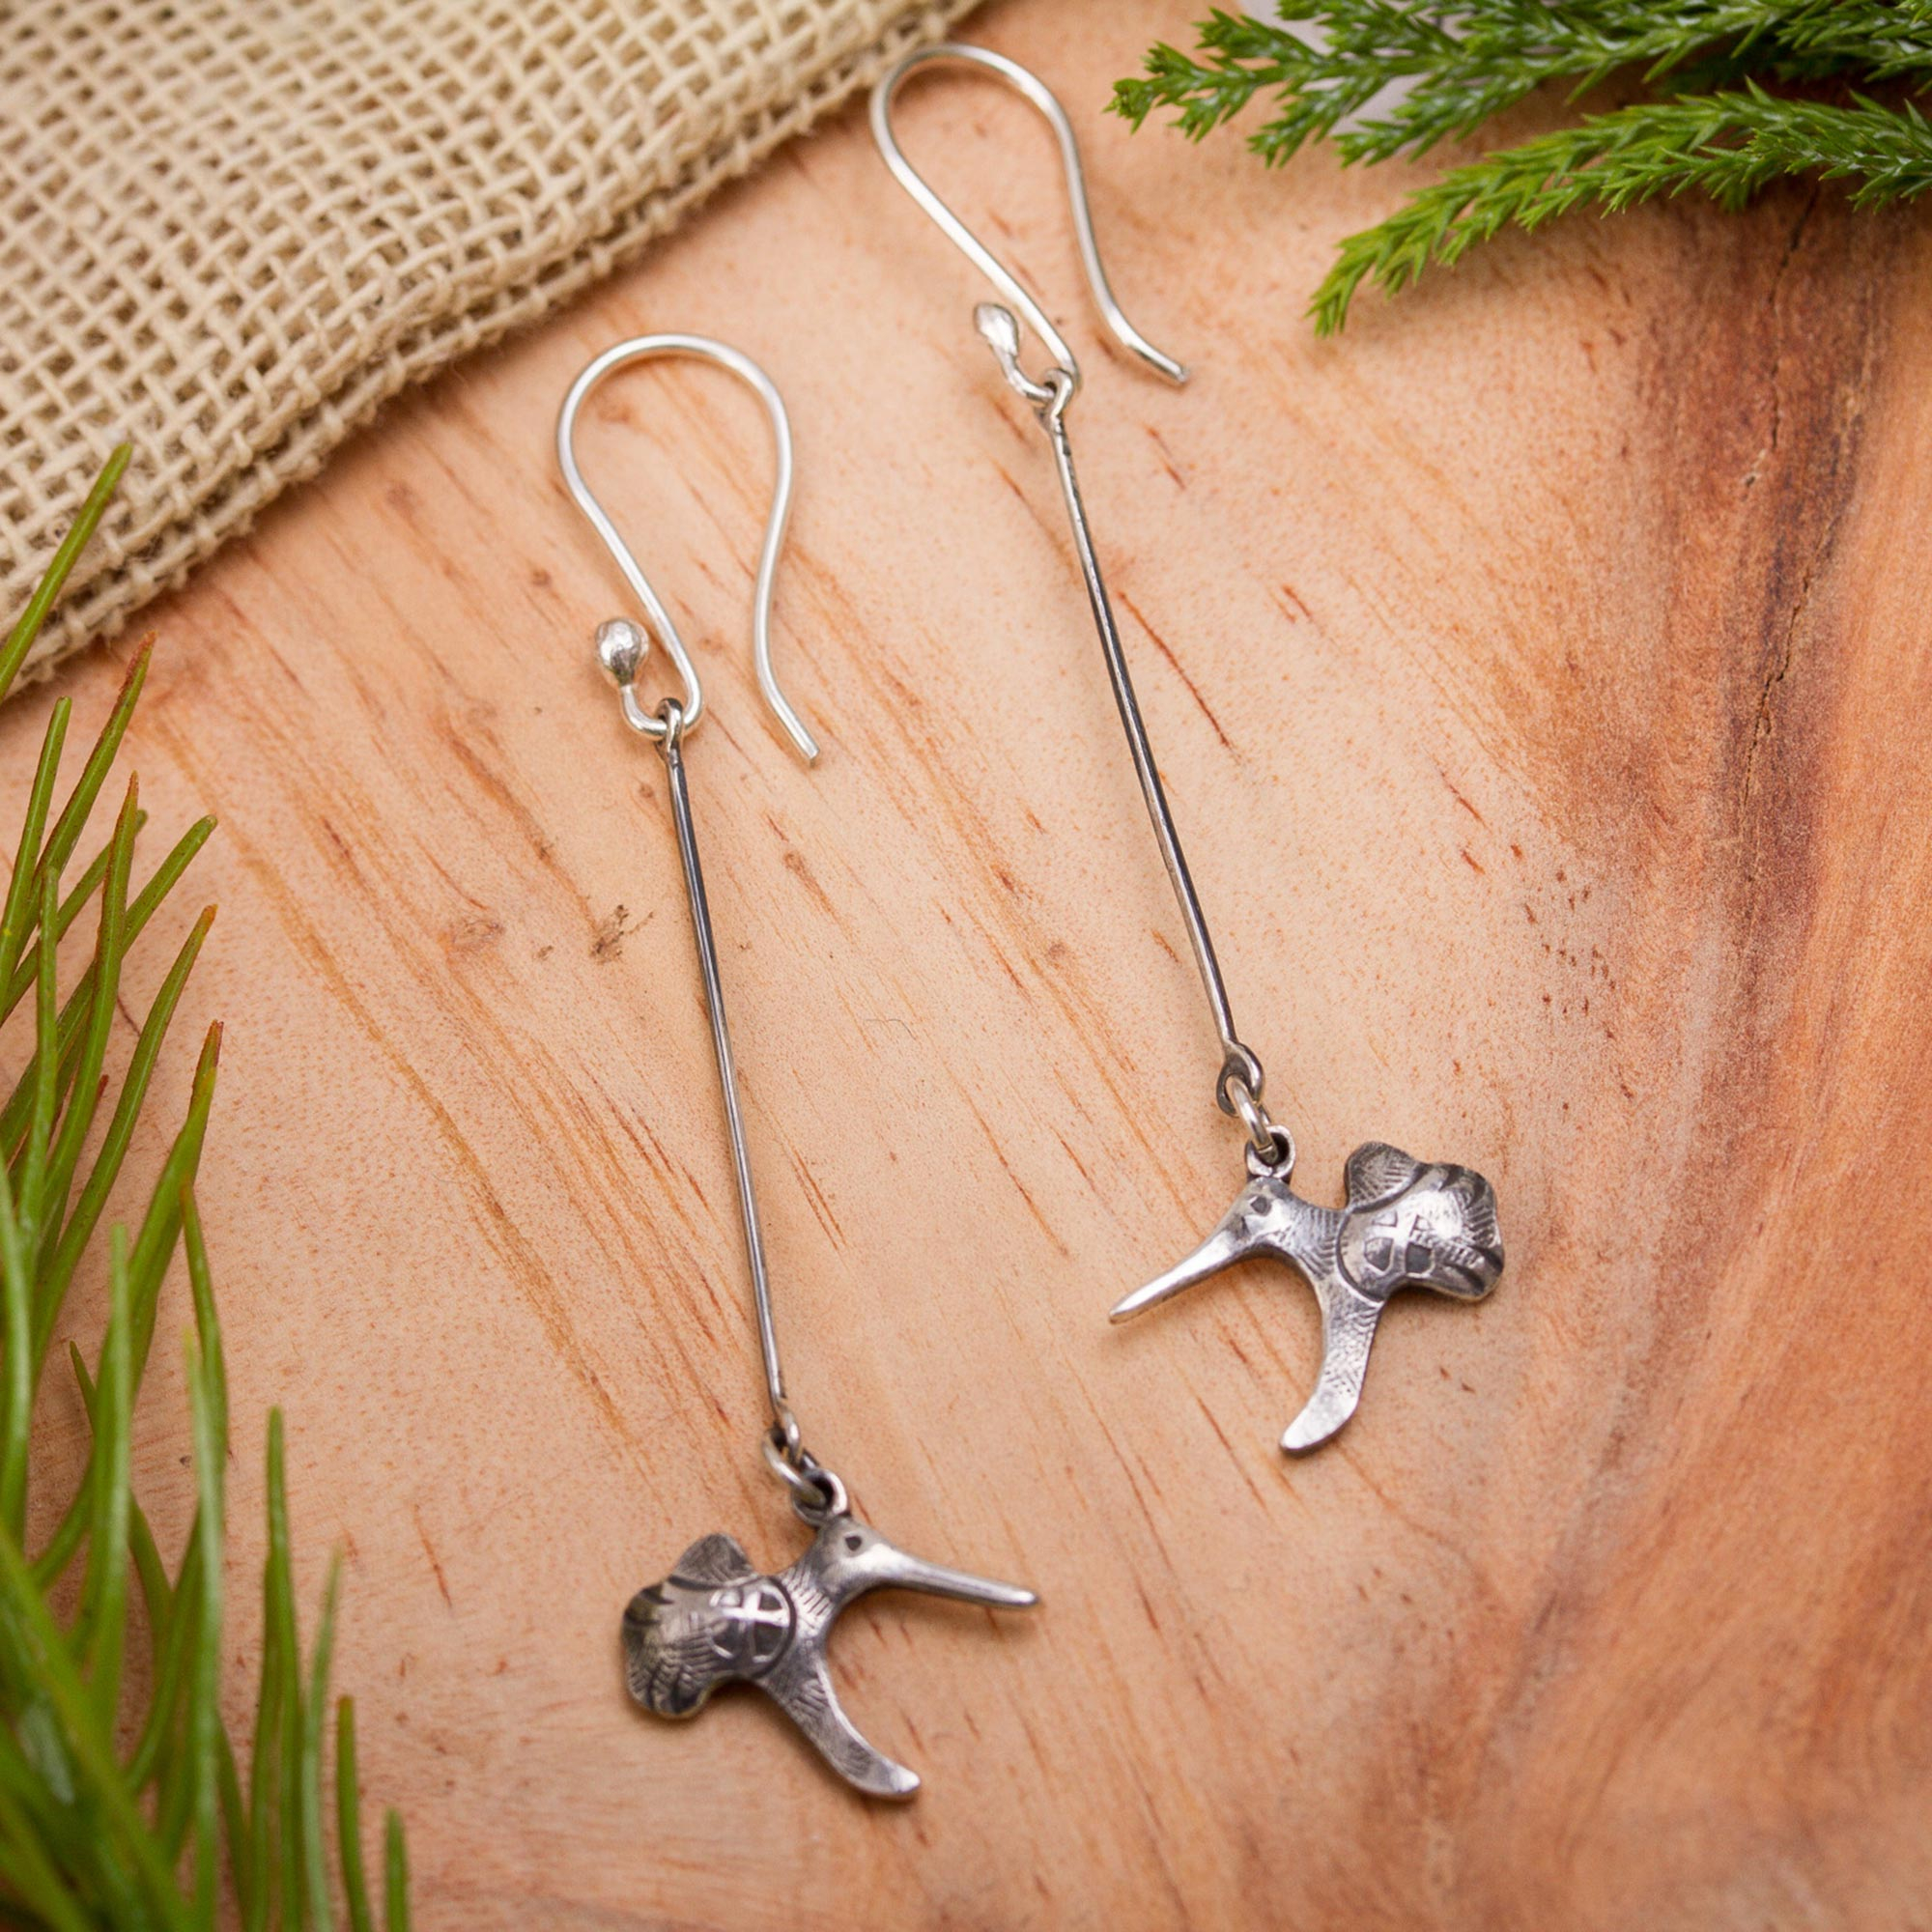 The Official Hairy Growler Jewellery Co. Cambridge - handcrafted and  recycled spoon watchful, mindful bird earrings.